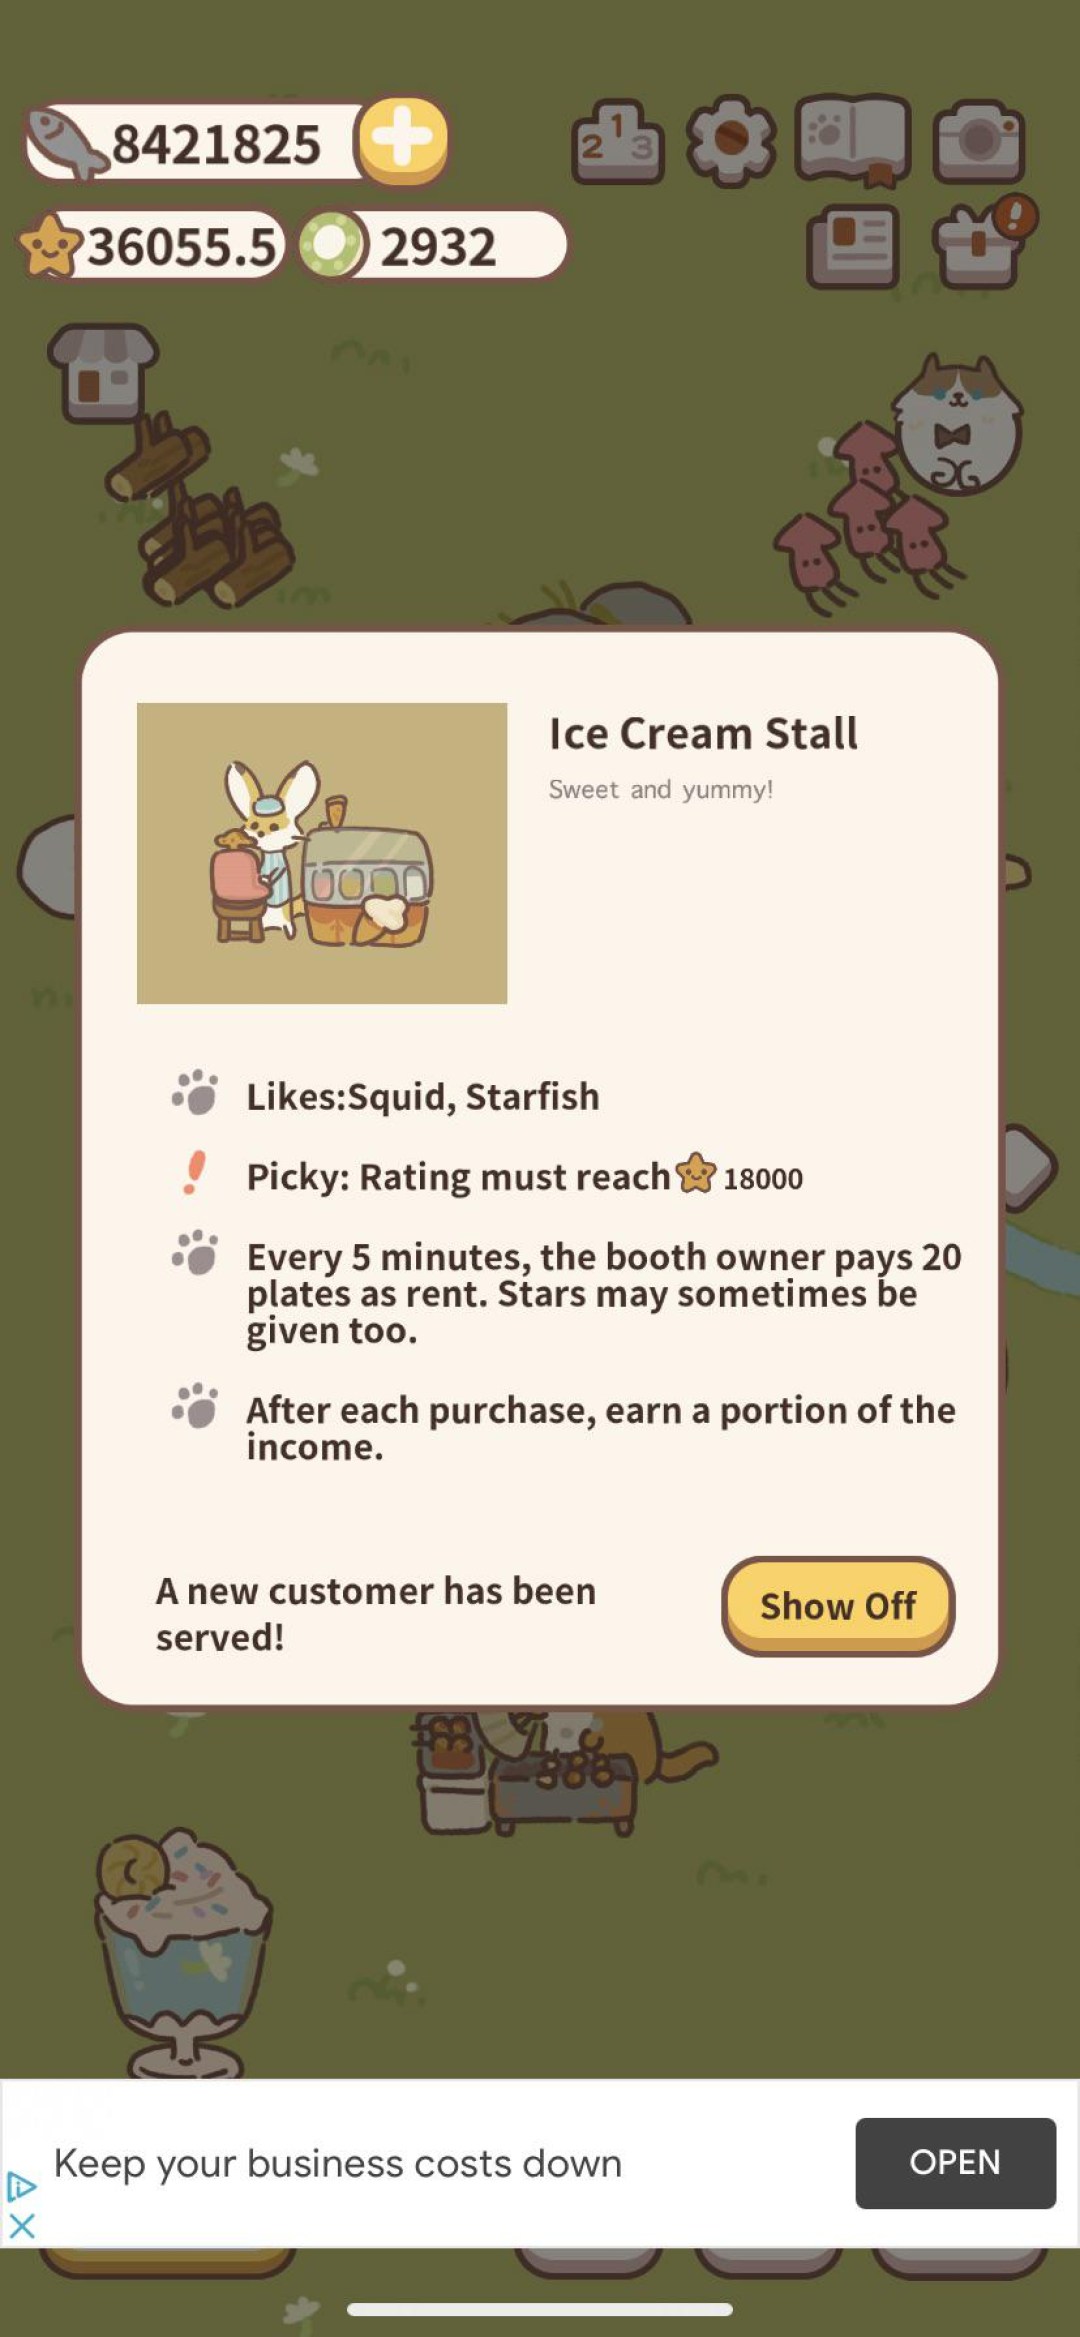 Picture of: finally got the ice cream stall after being so impatient 😭 : r